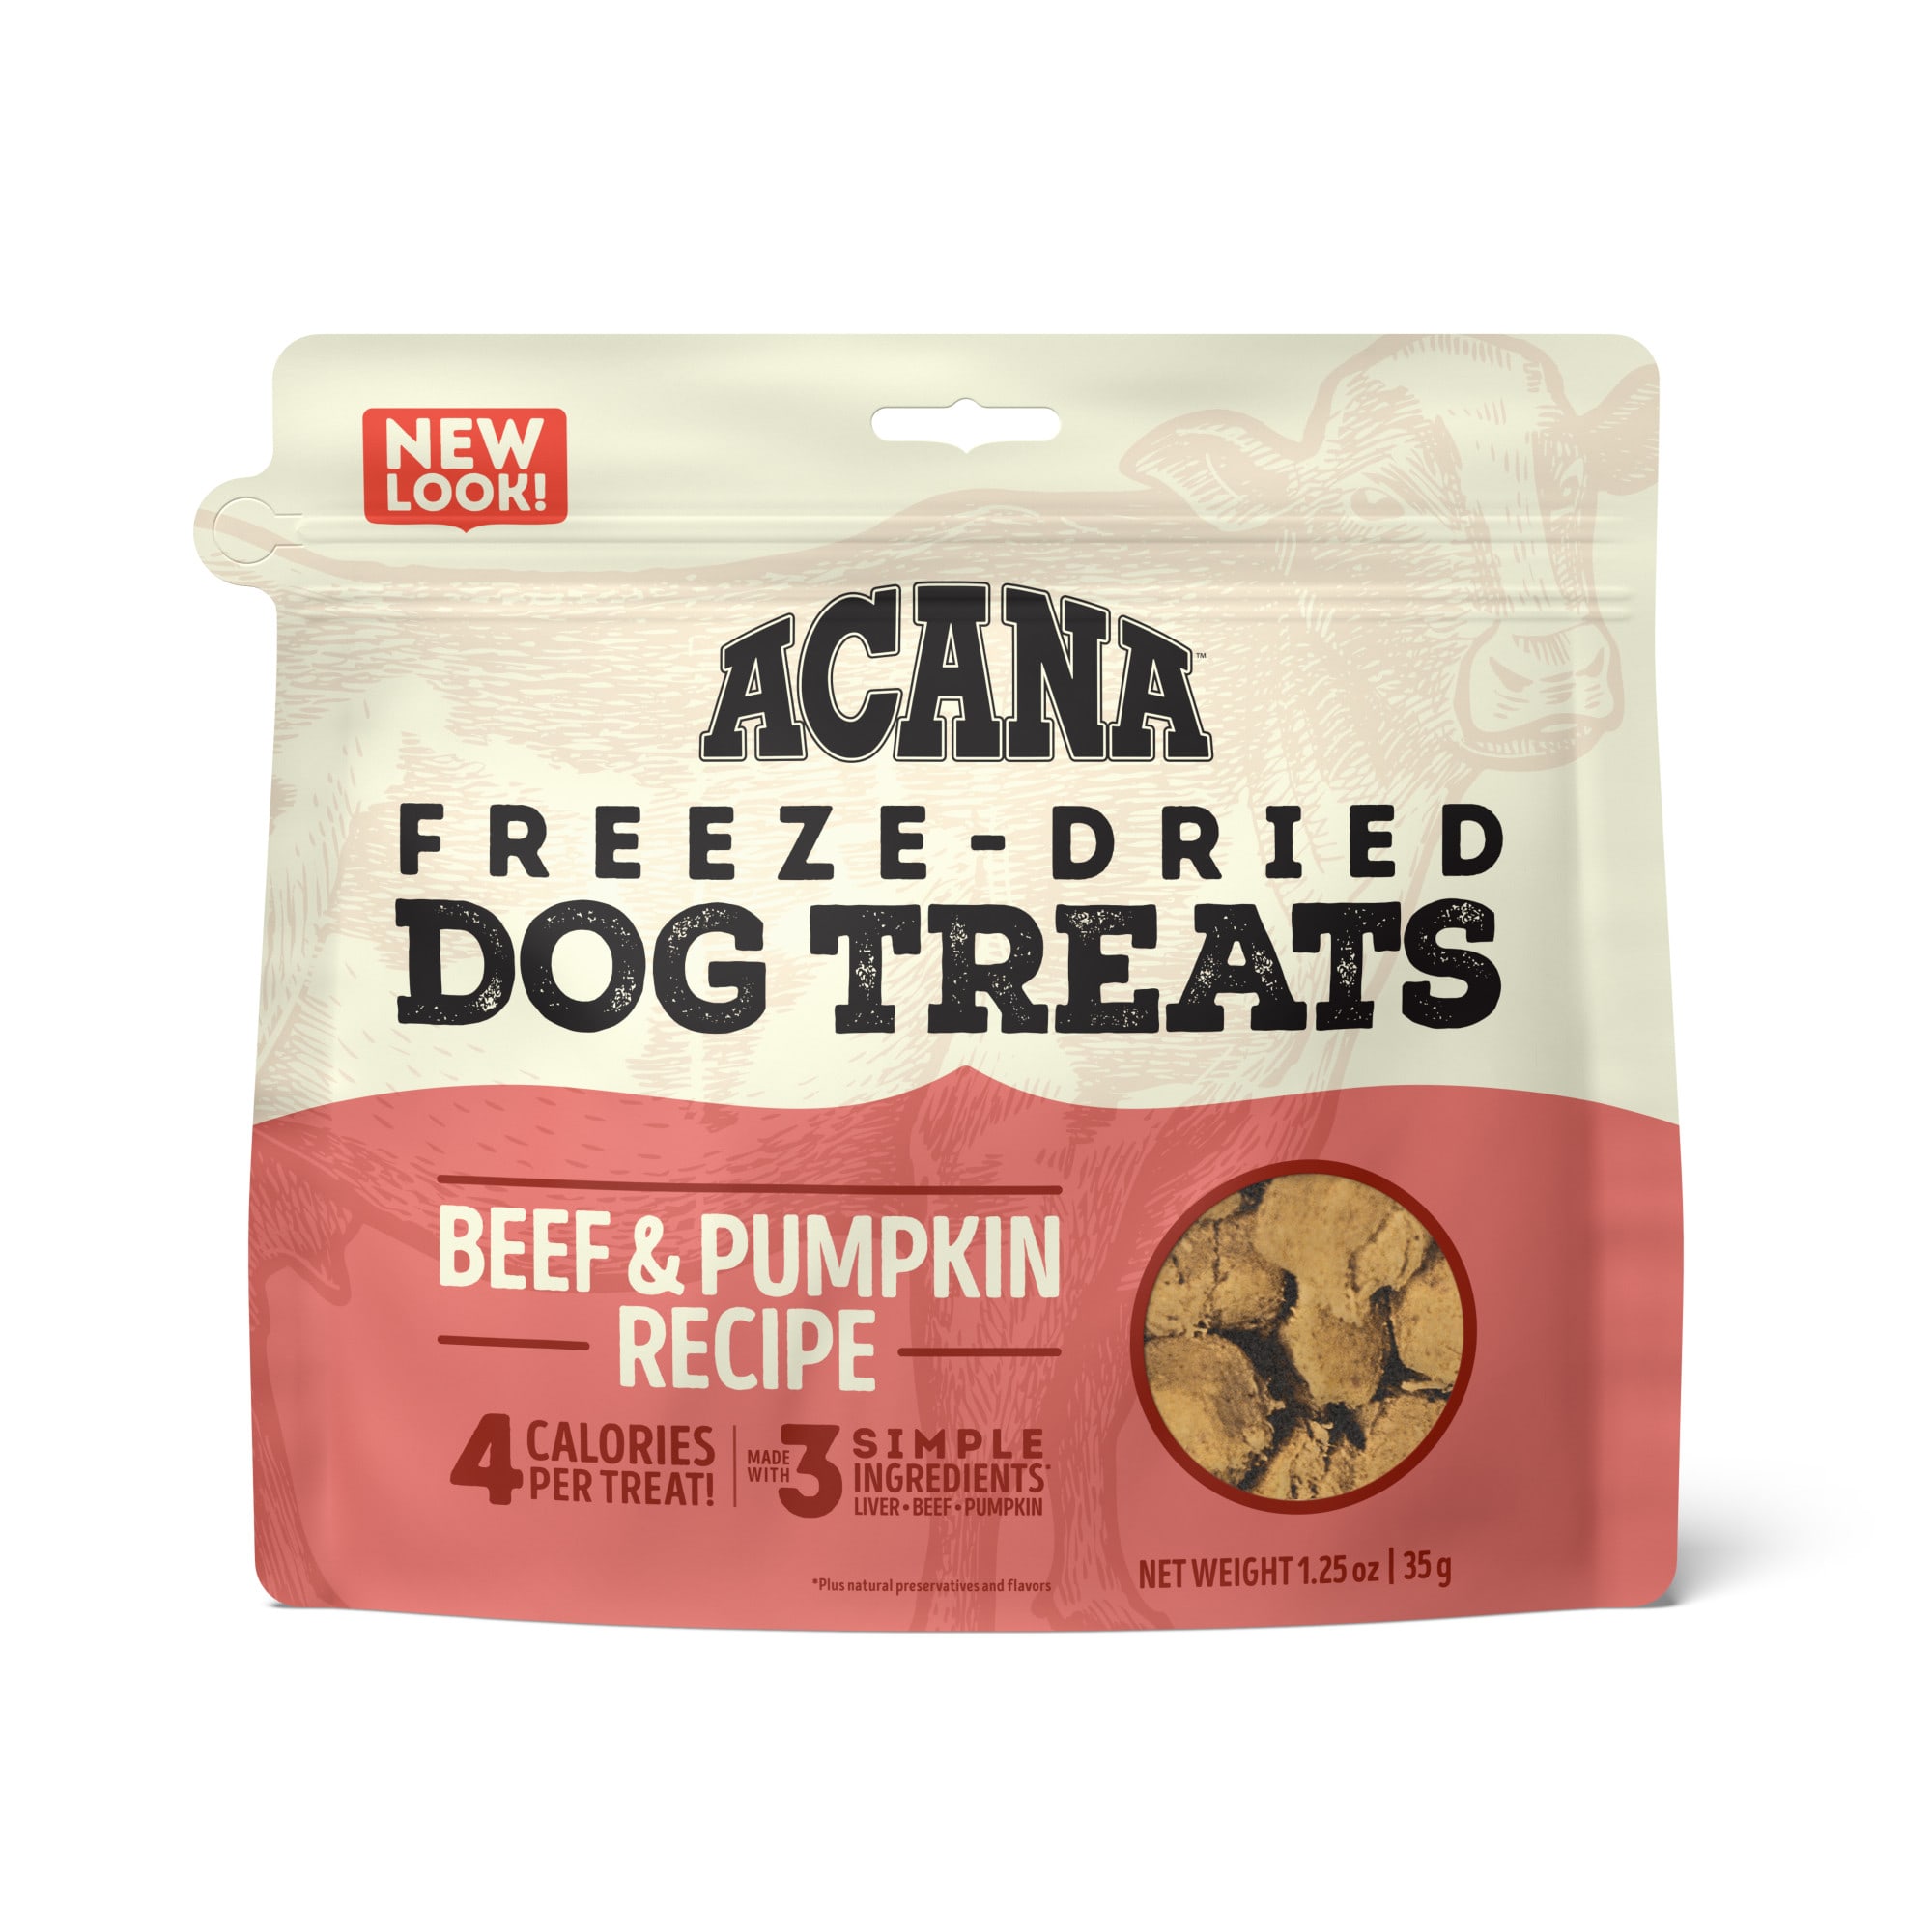 how many calories are in a cup of acana dog food